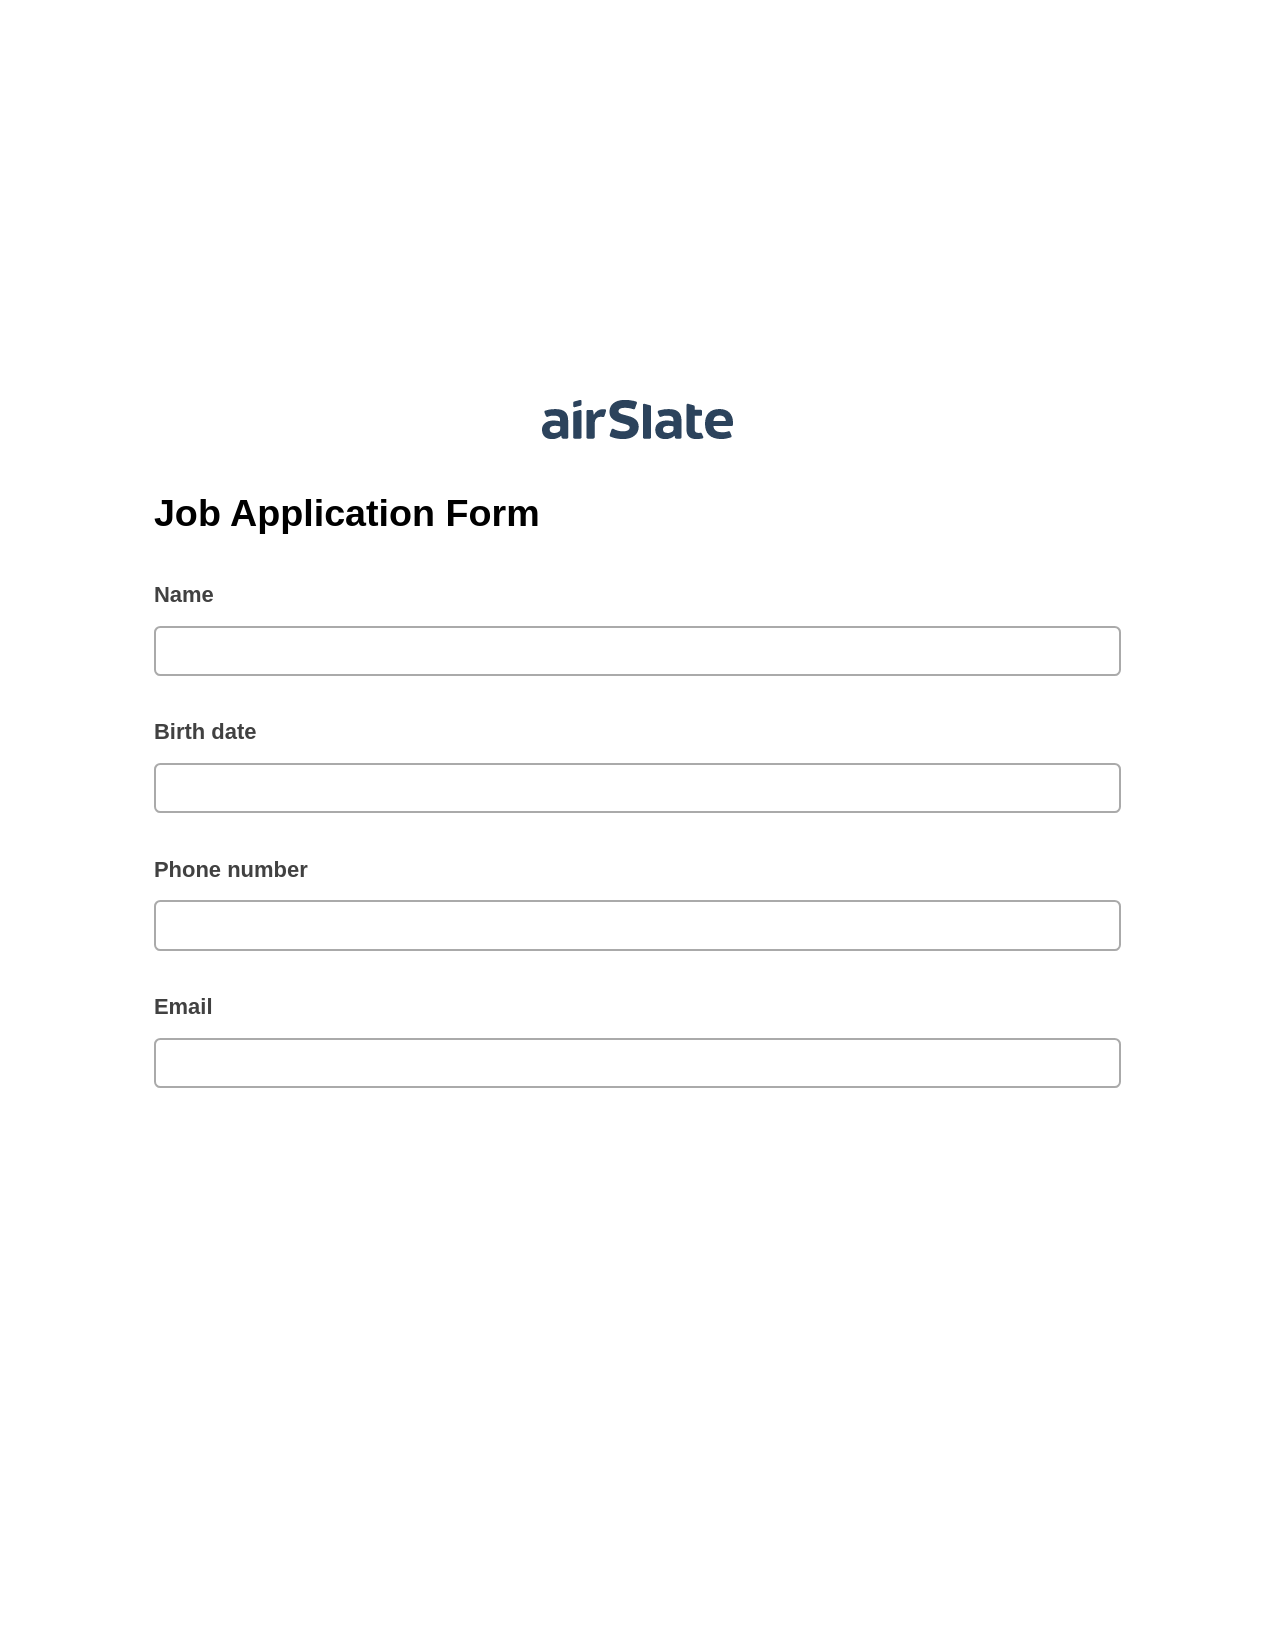 Multirole Job Application Form Pre-fill from Office 365 Excel Bot, Update Salesforce Record Bot, Export to Excel 365 Bot